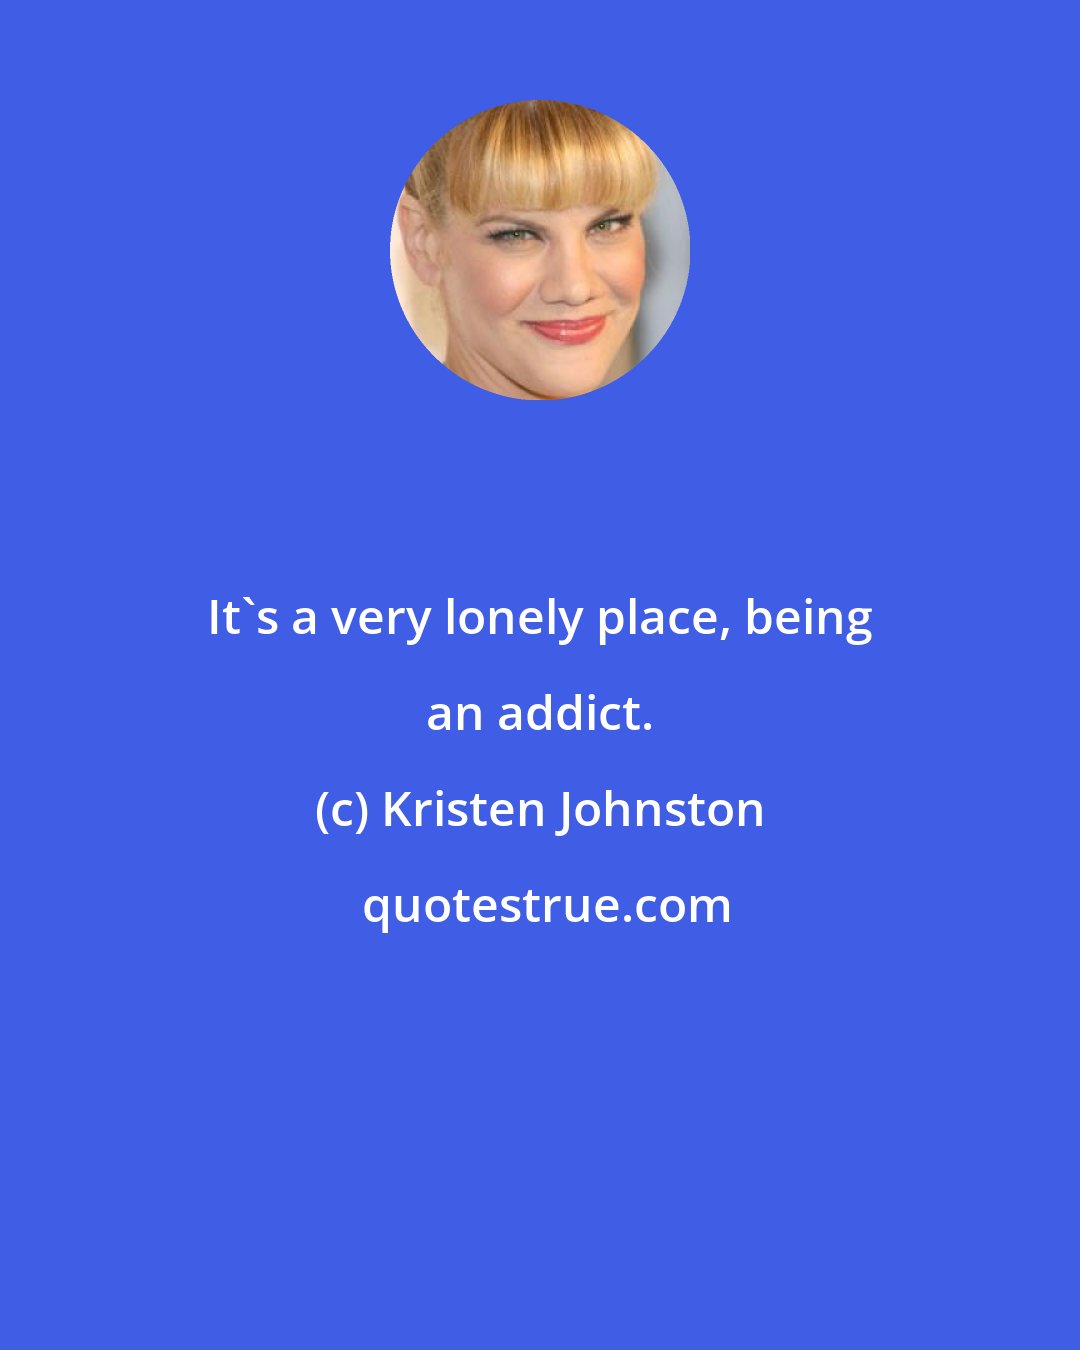 Kristen Johnston: It's a very lonely place, being an addict.